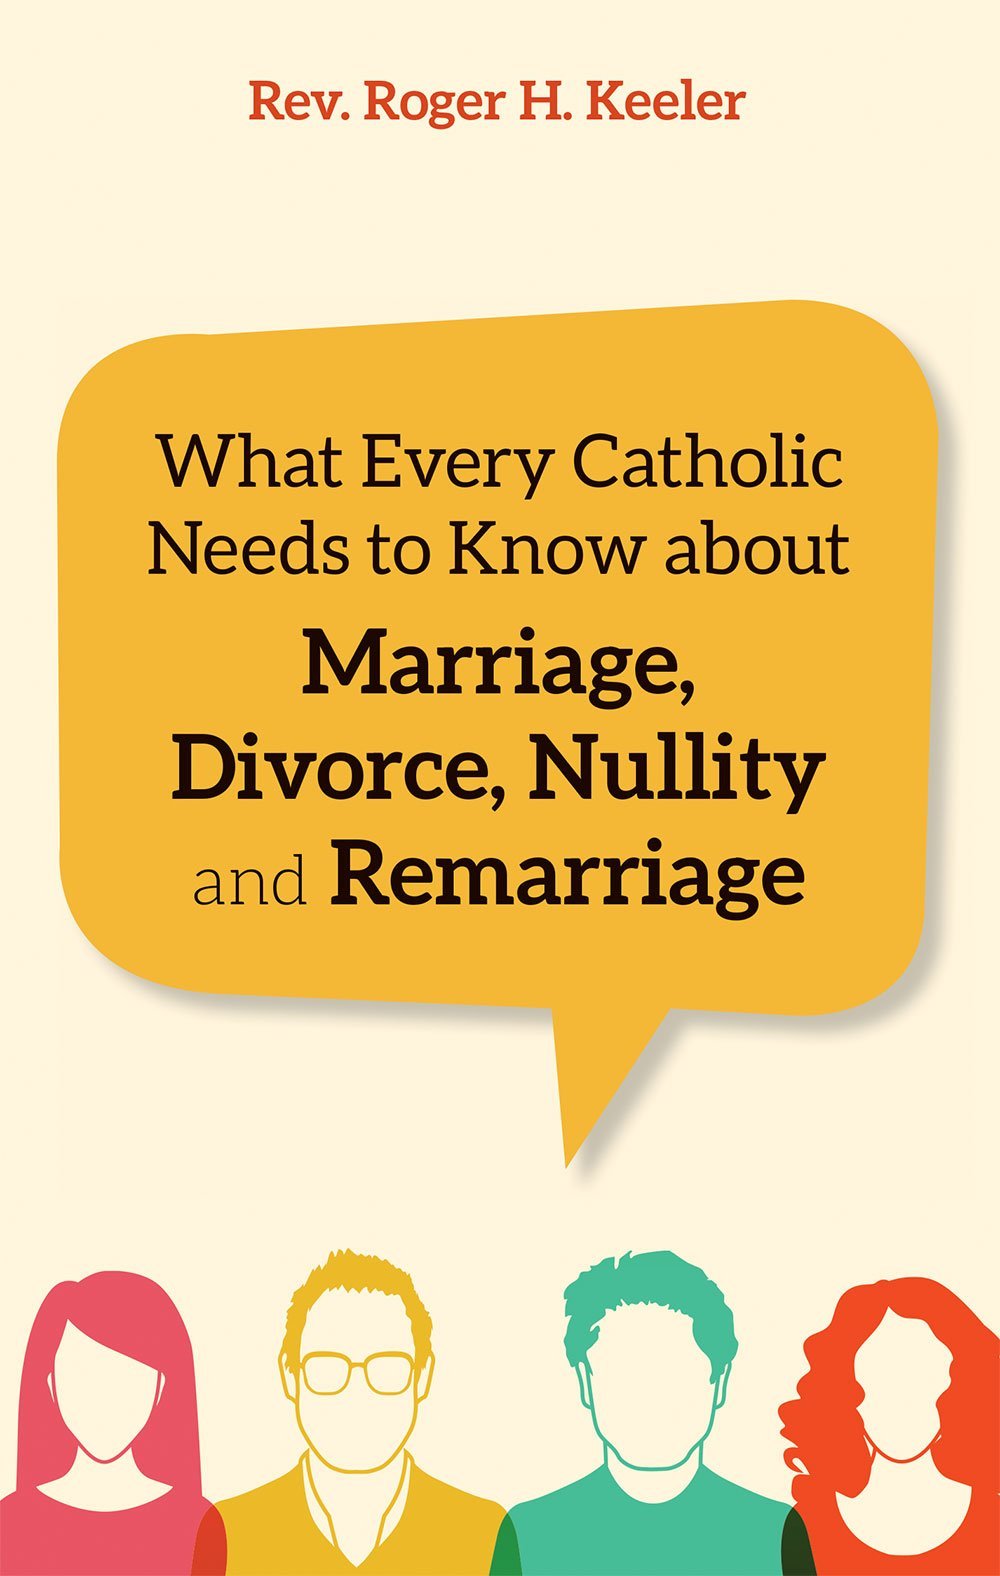 What Every Catholic Needs to Know about Marriage, Divorce, Nullity, and Remarriage